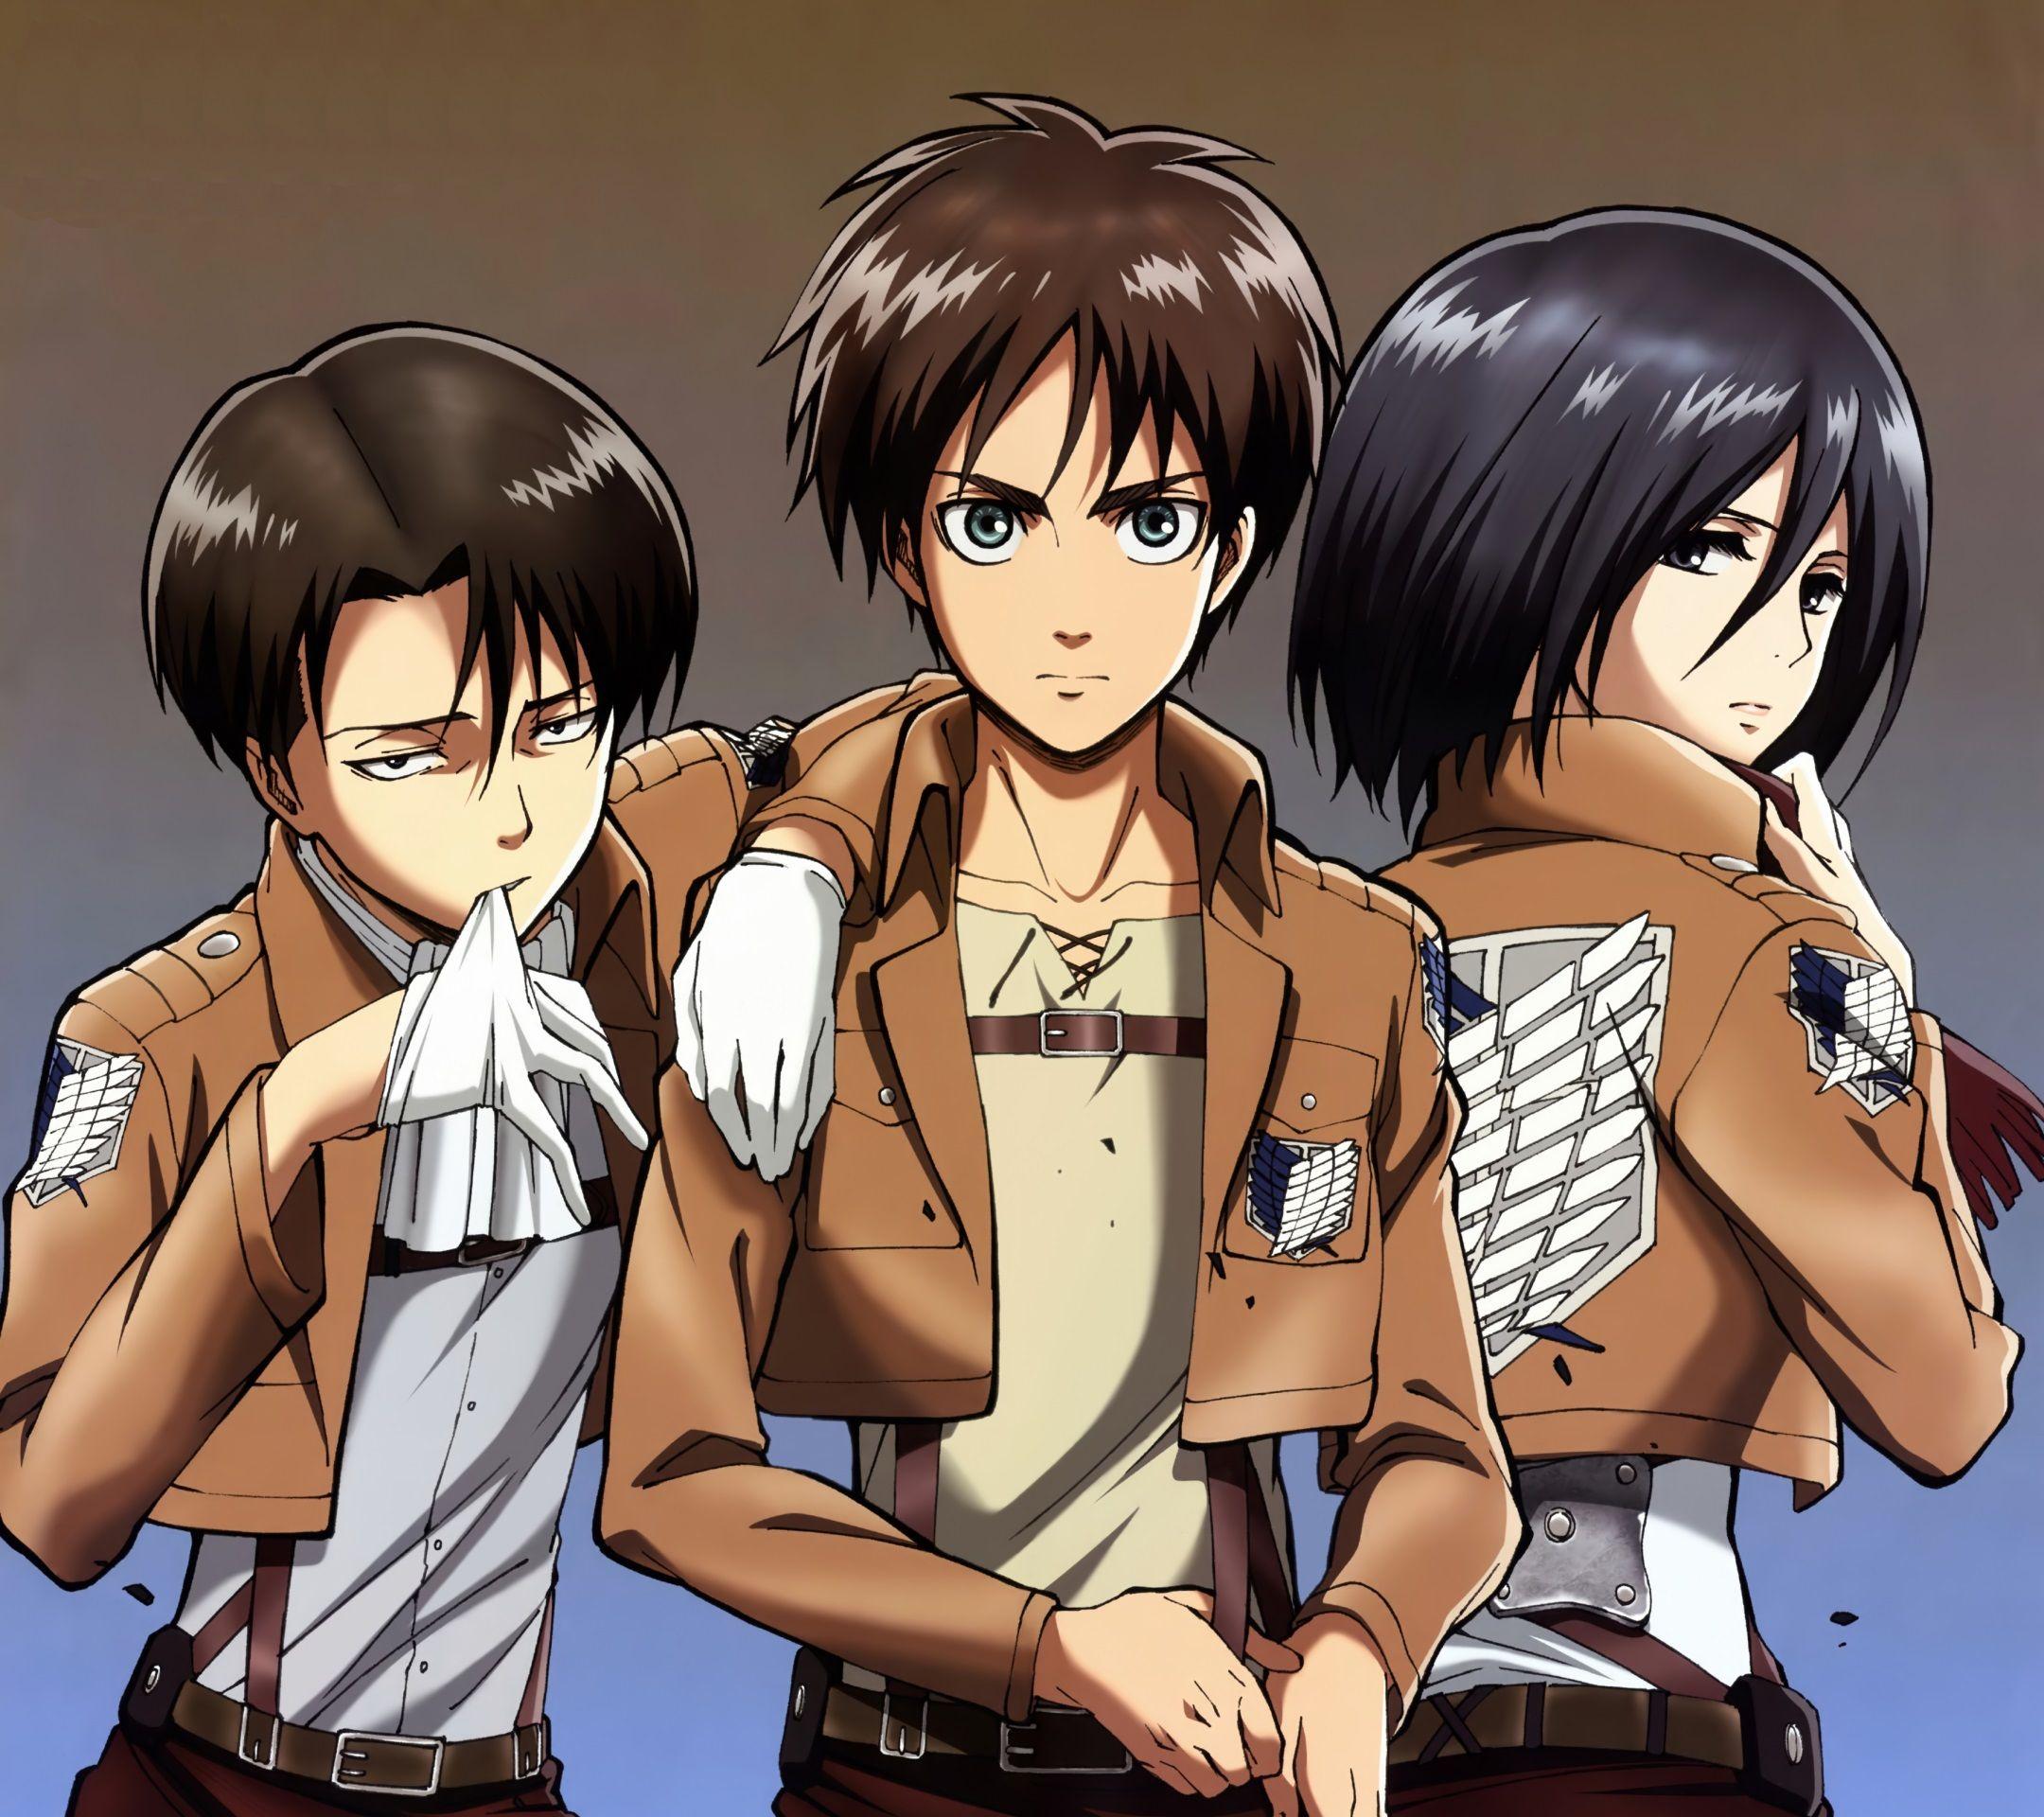 Shingeki no Kyojin (Attack on Titan) iPhone 5 and Android wallpaper